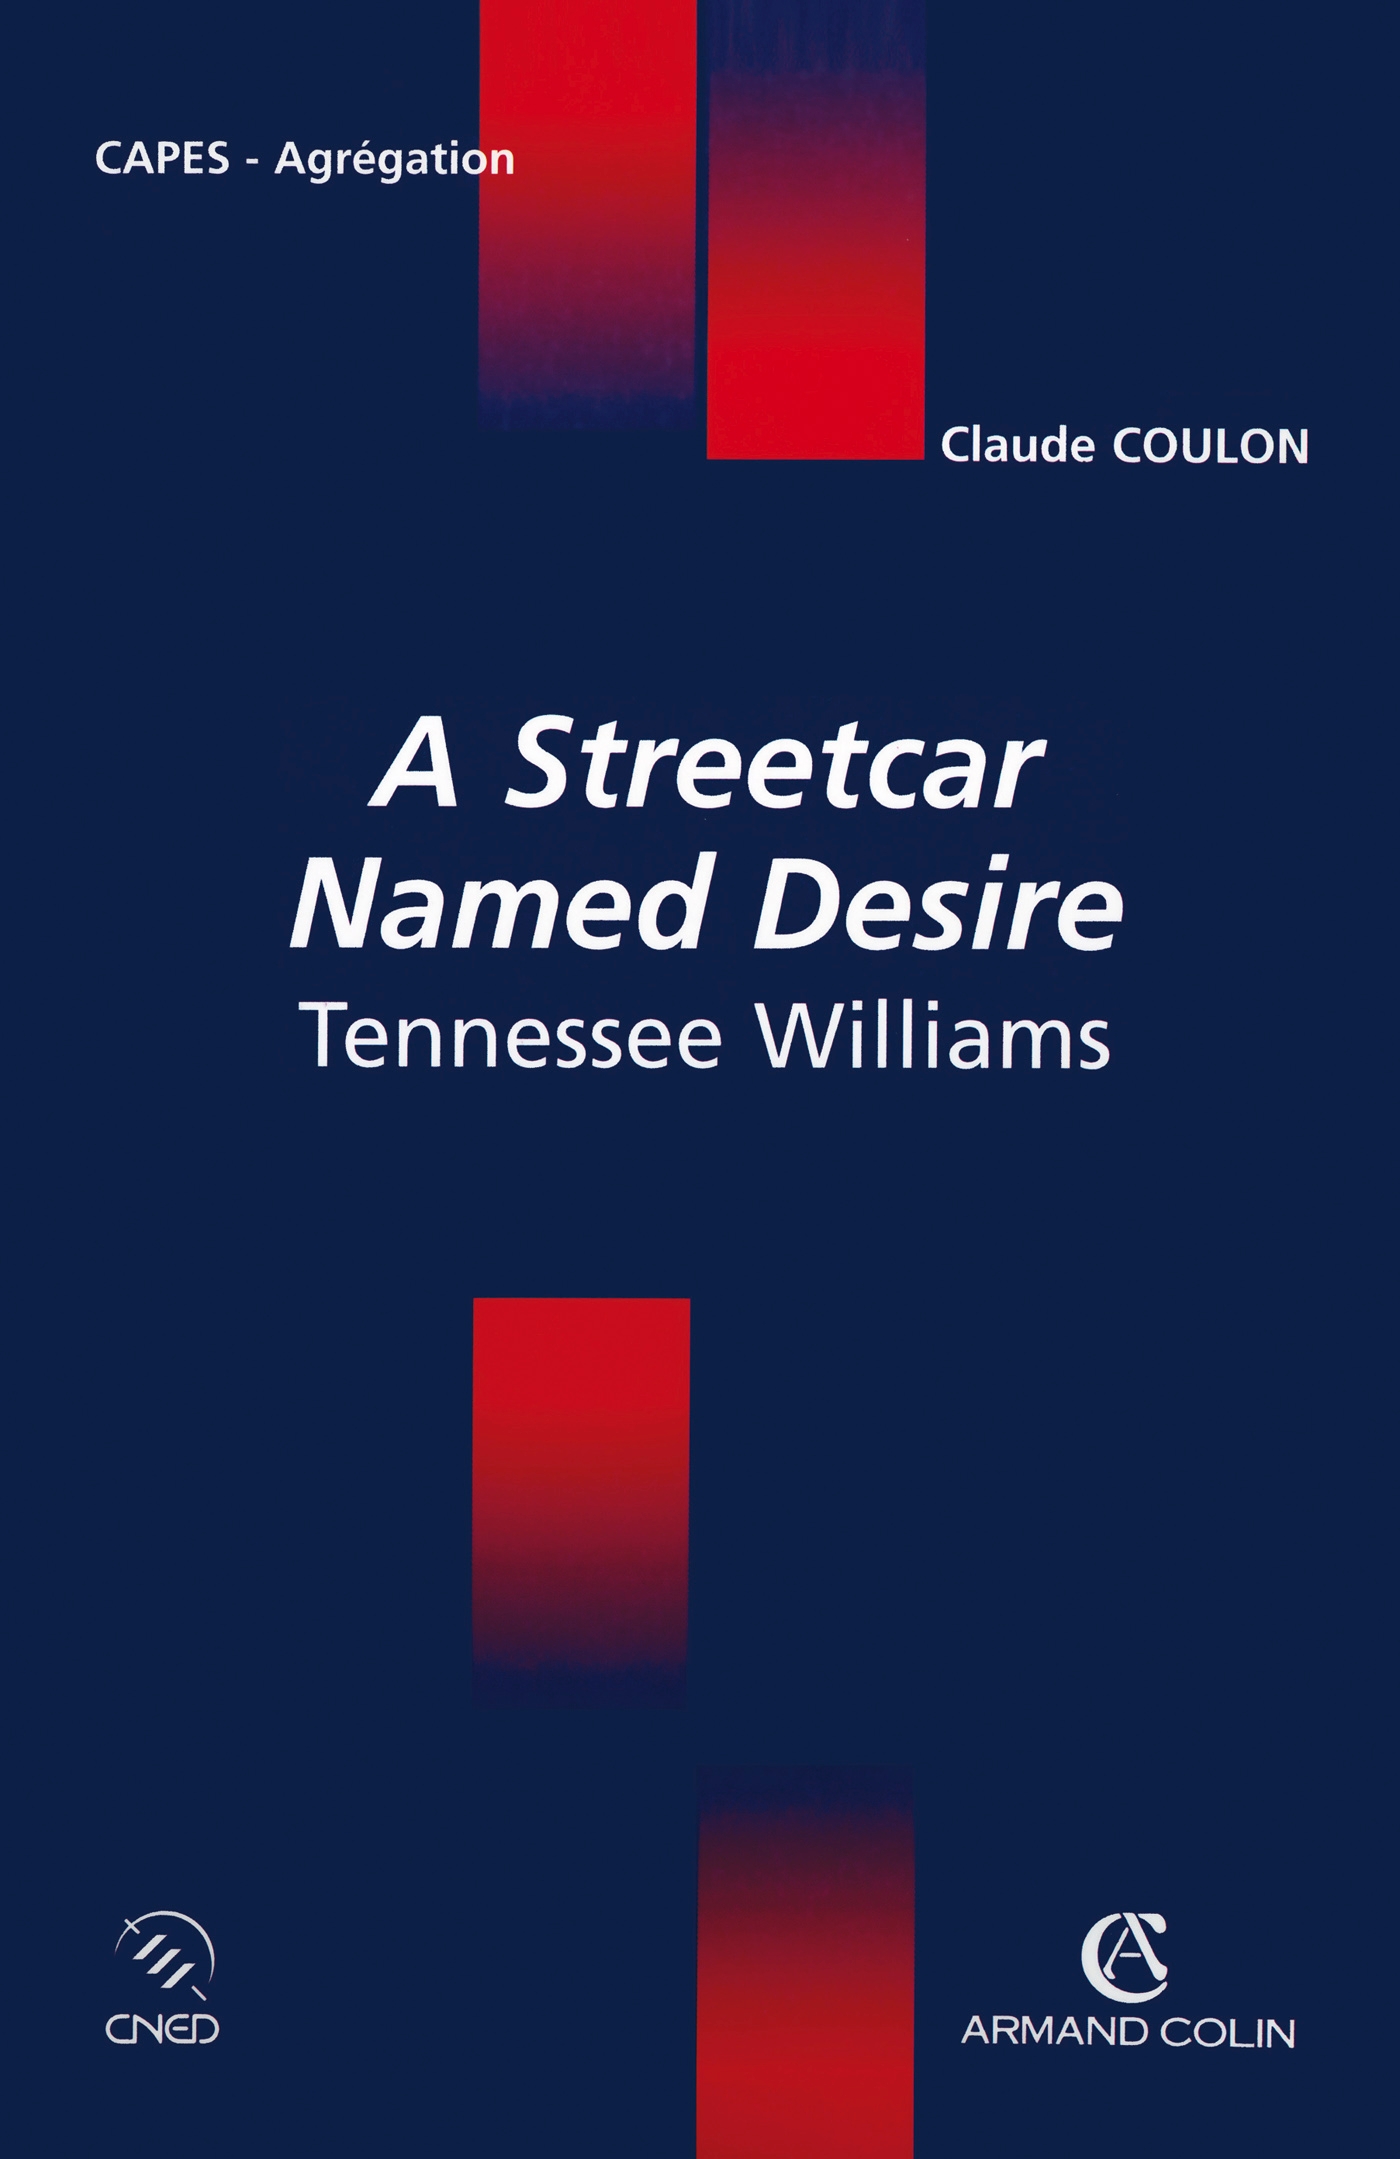 A Streetcar Named Desire Tennessee Williams - 15-24.99